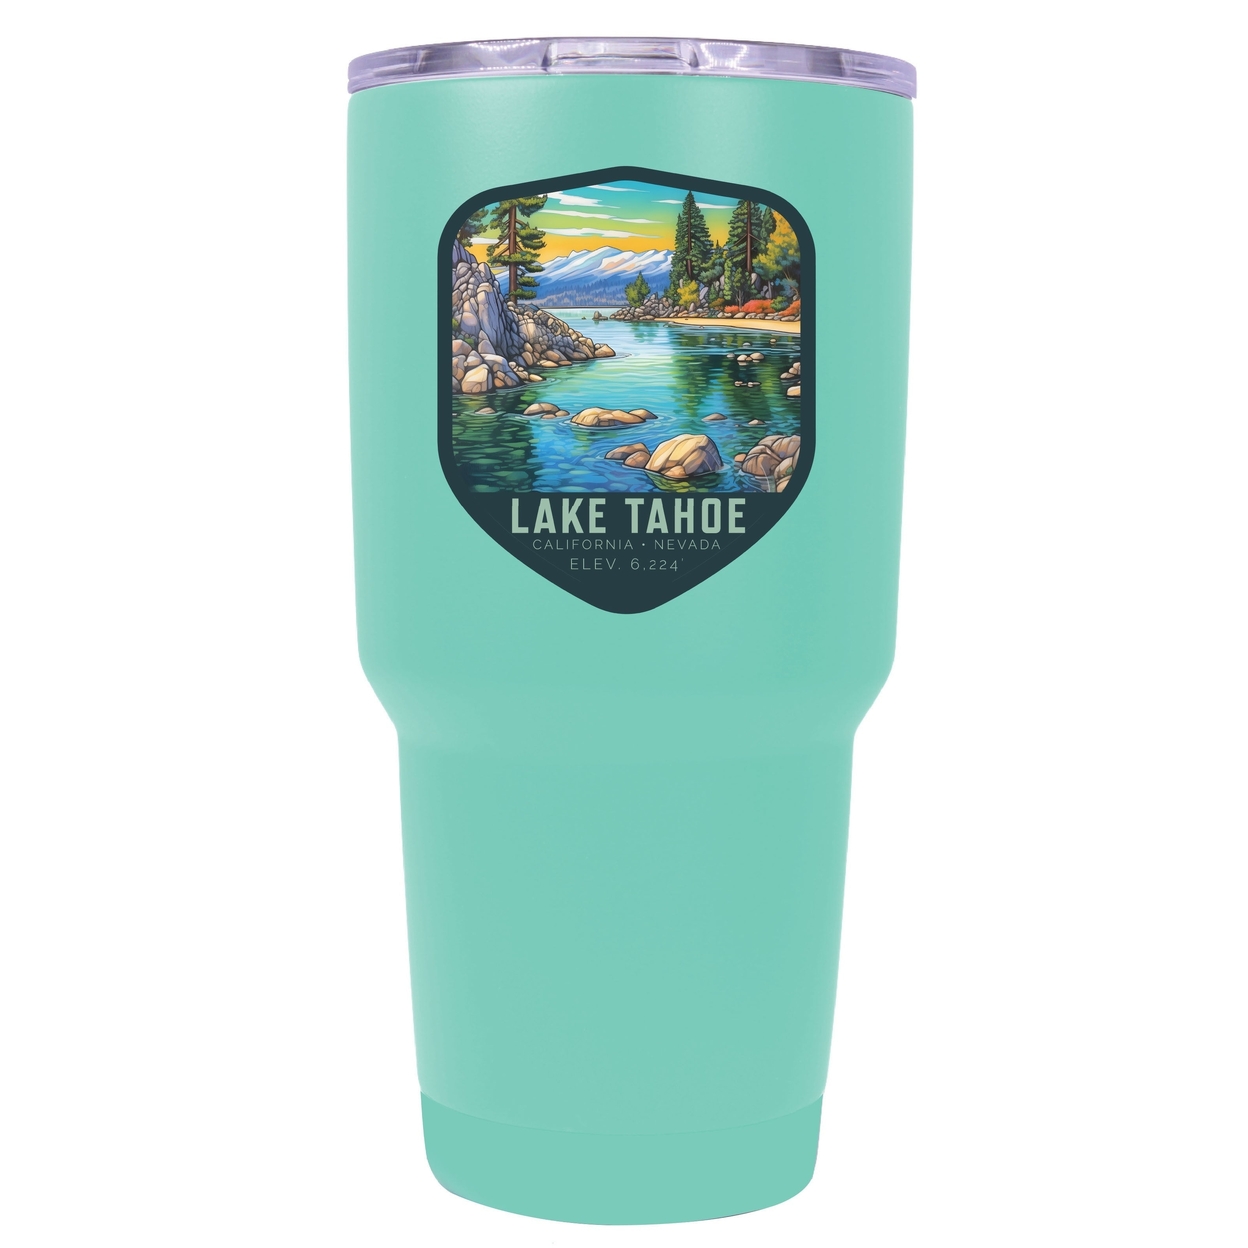 Tulane University Green Wave Proud Mom 24 Oz Insulated Stainless Steel Tumblers Choose Your Color. - Seafoam,,Single